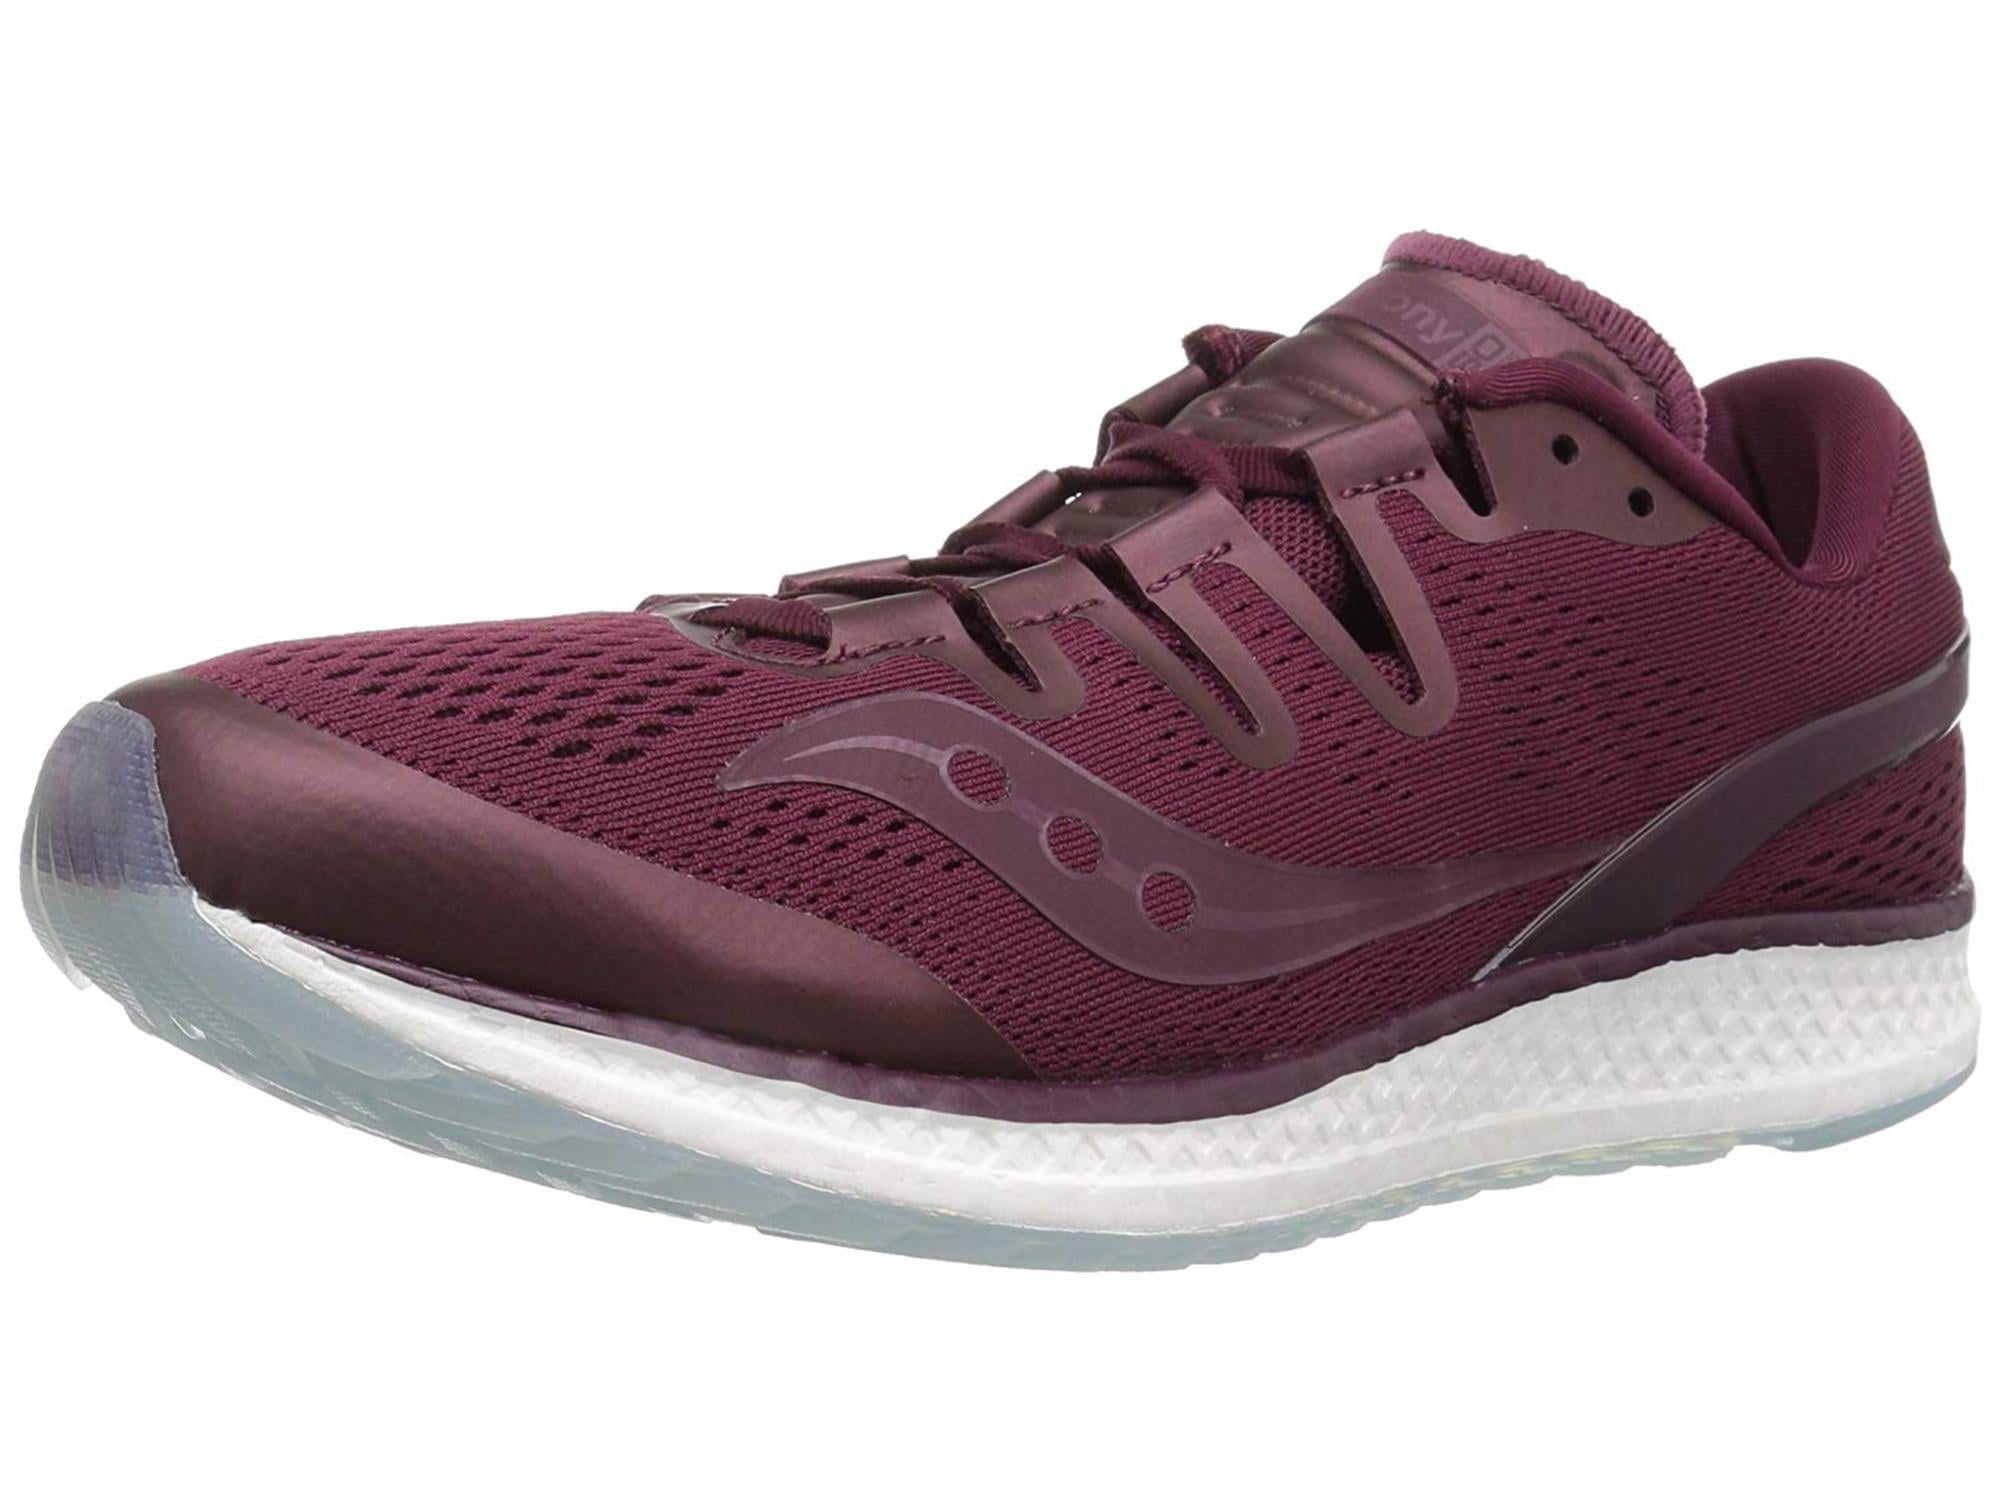 saucony shoes cheap canada